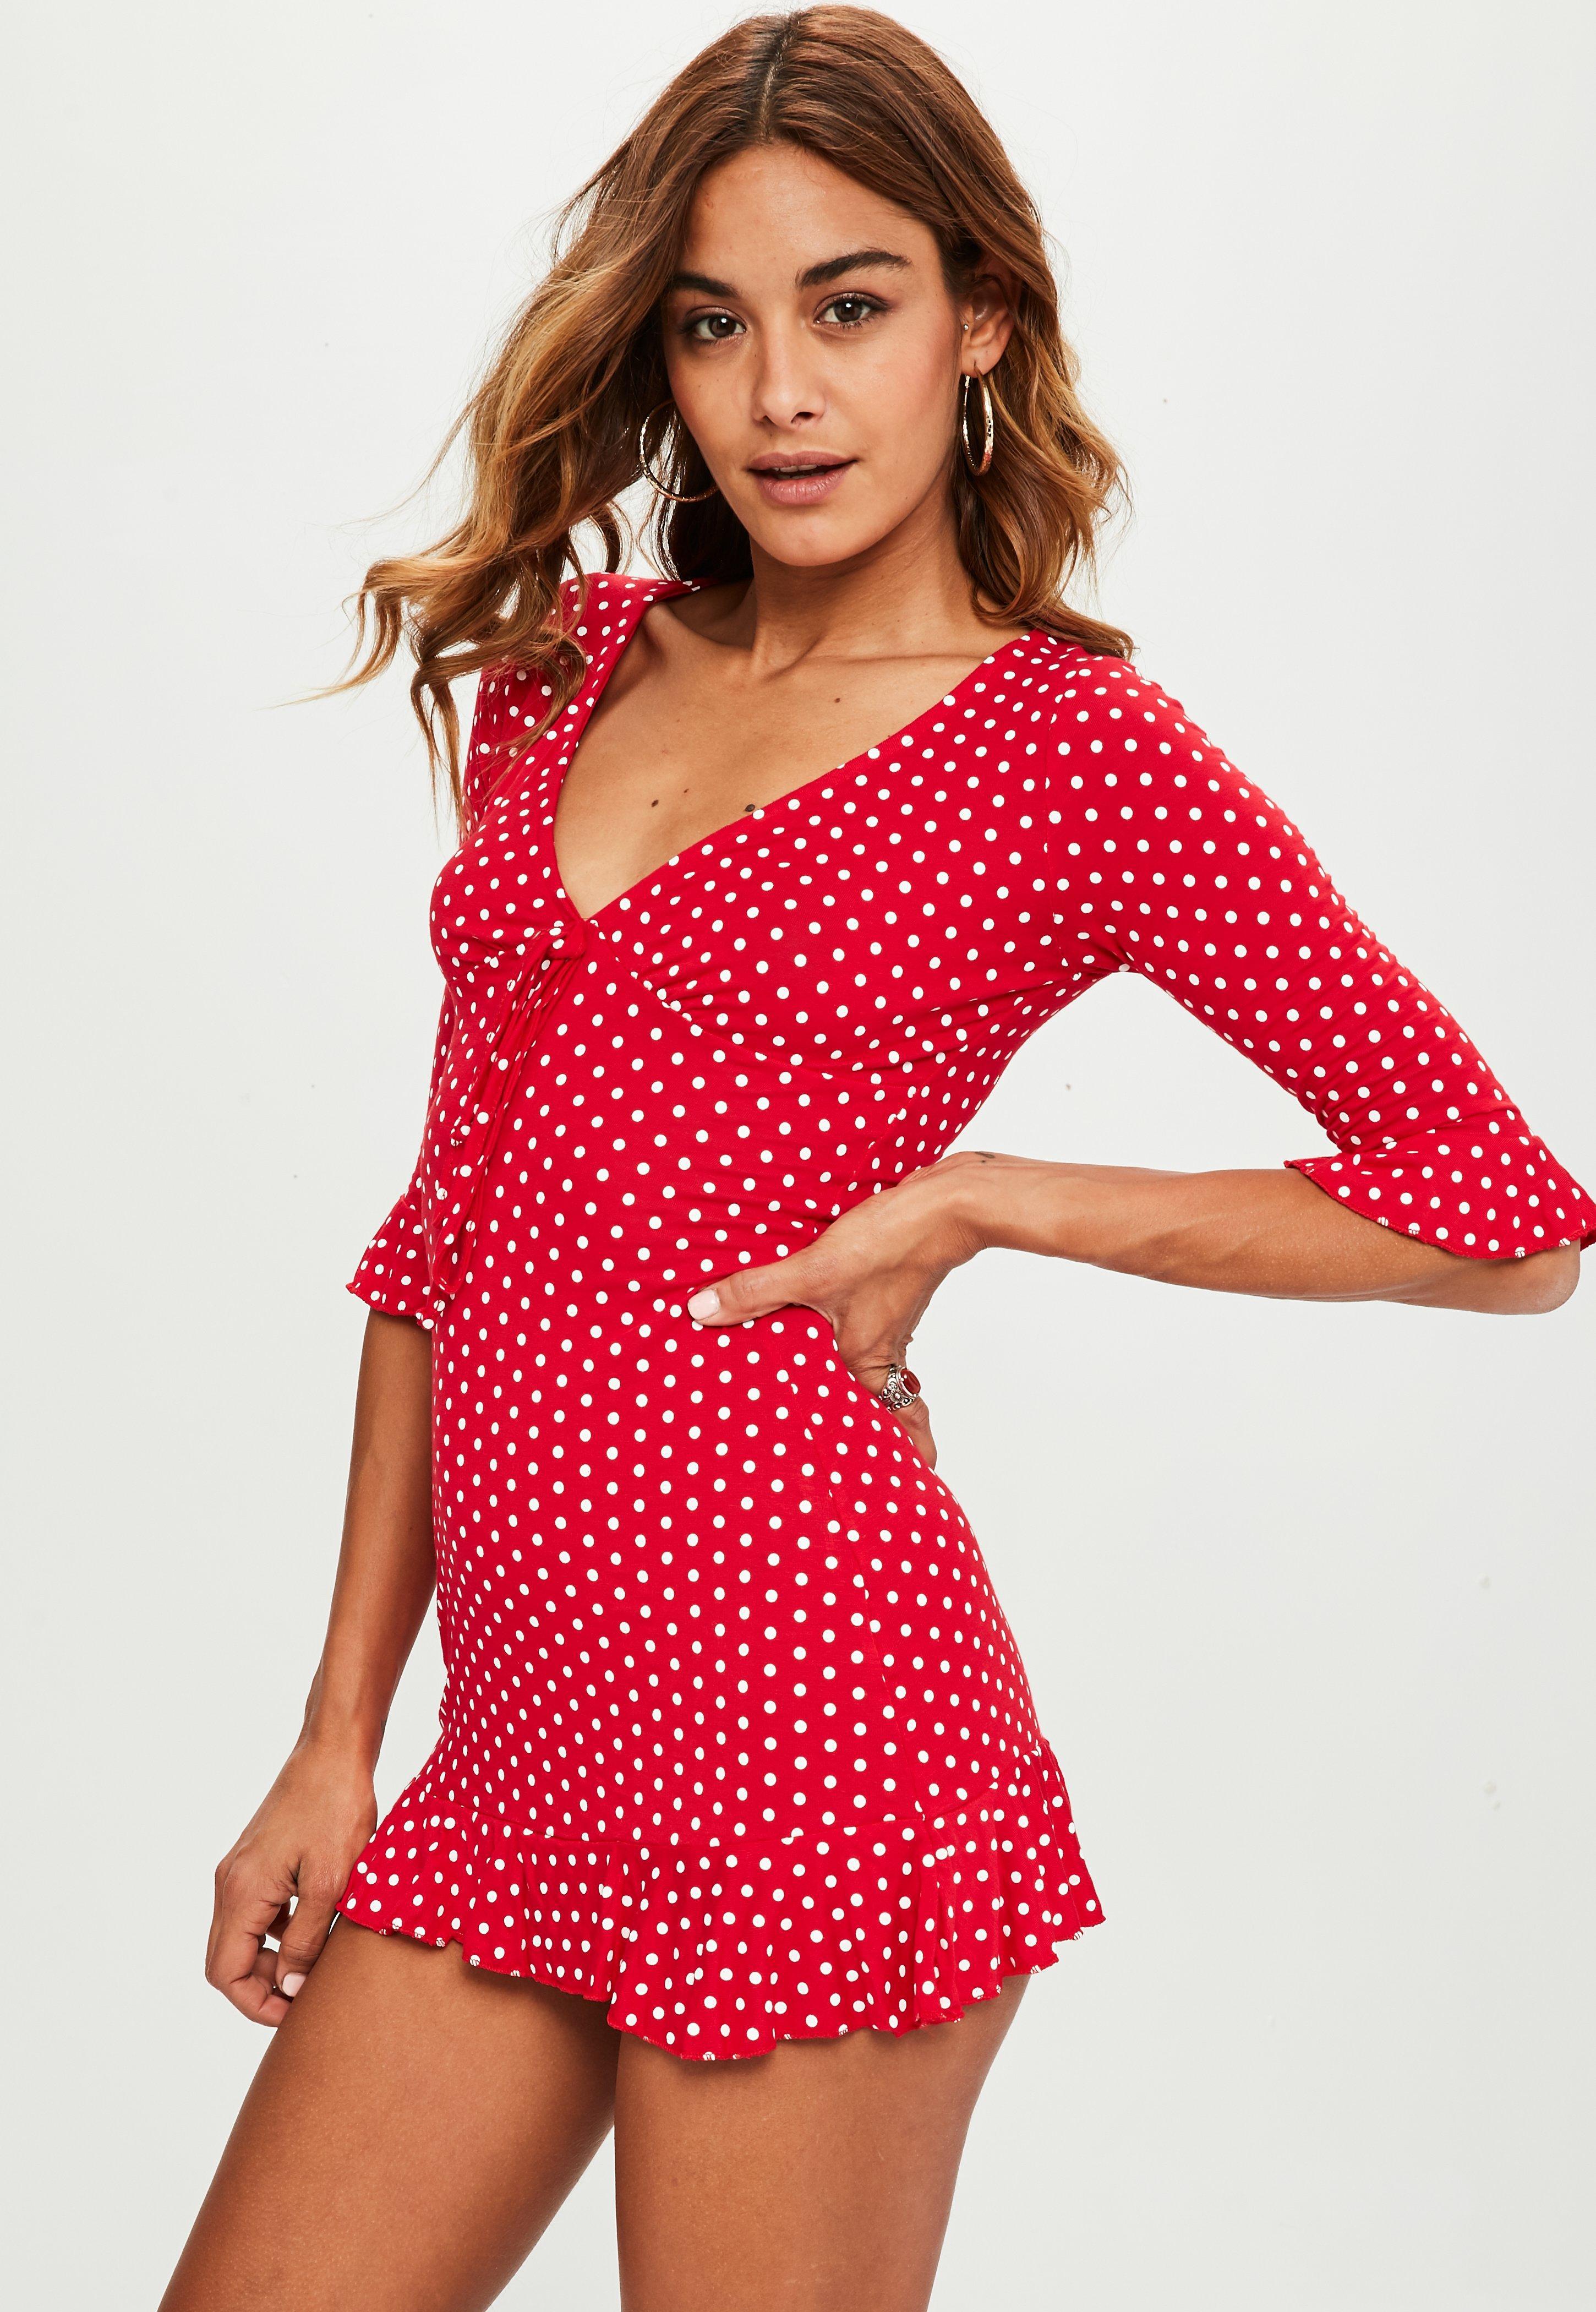 Lyst - Missguided Tall Red Polka Dot Print Frill Dress in Red